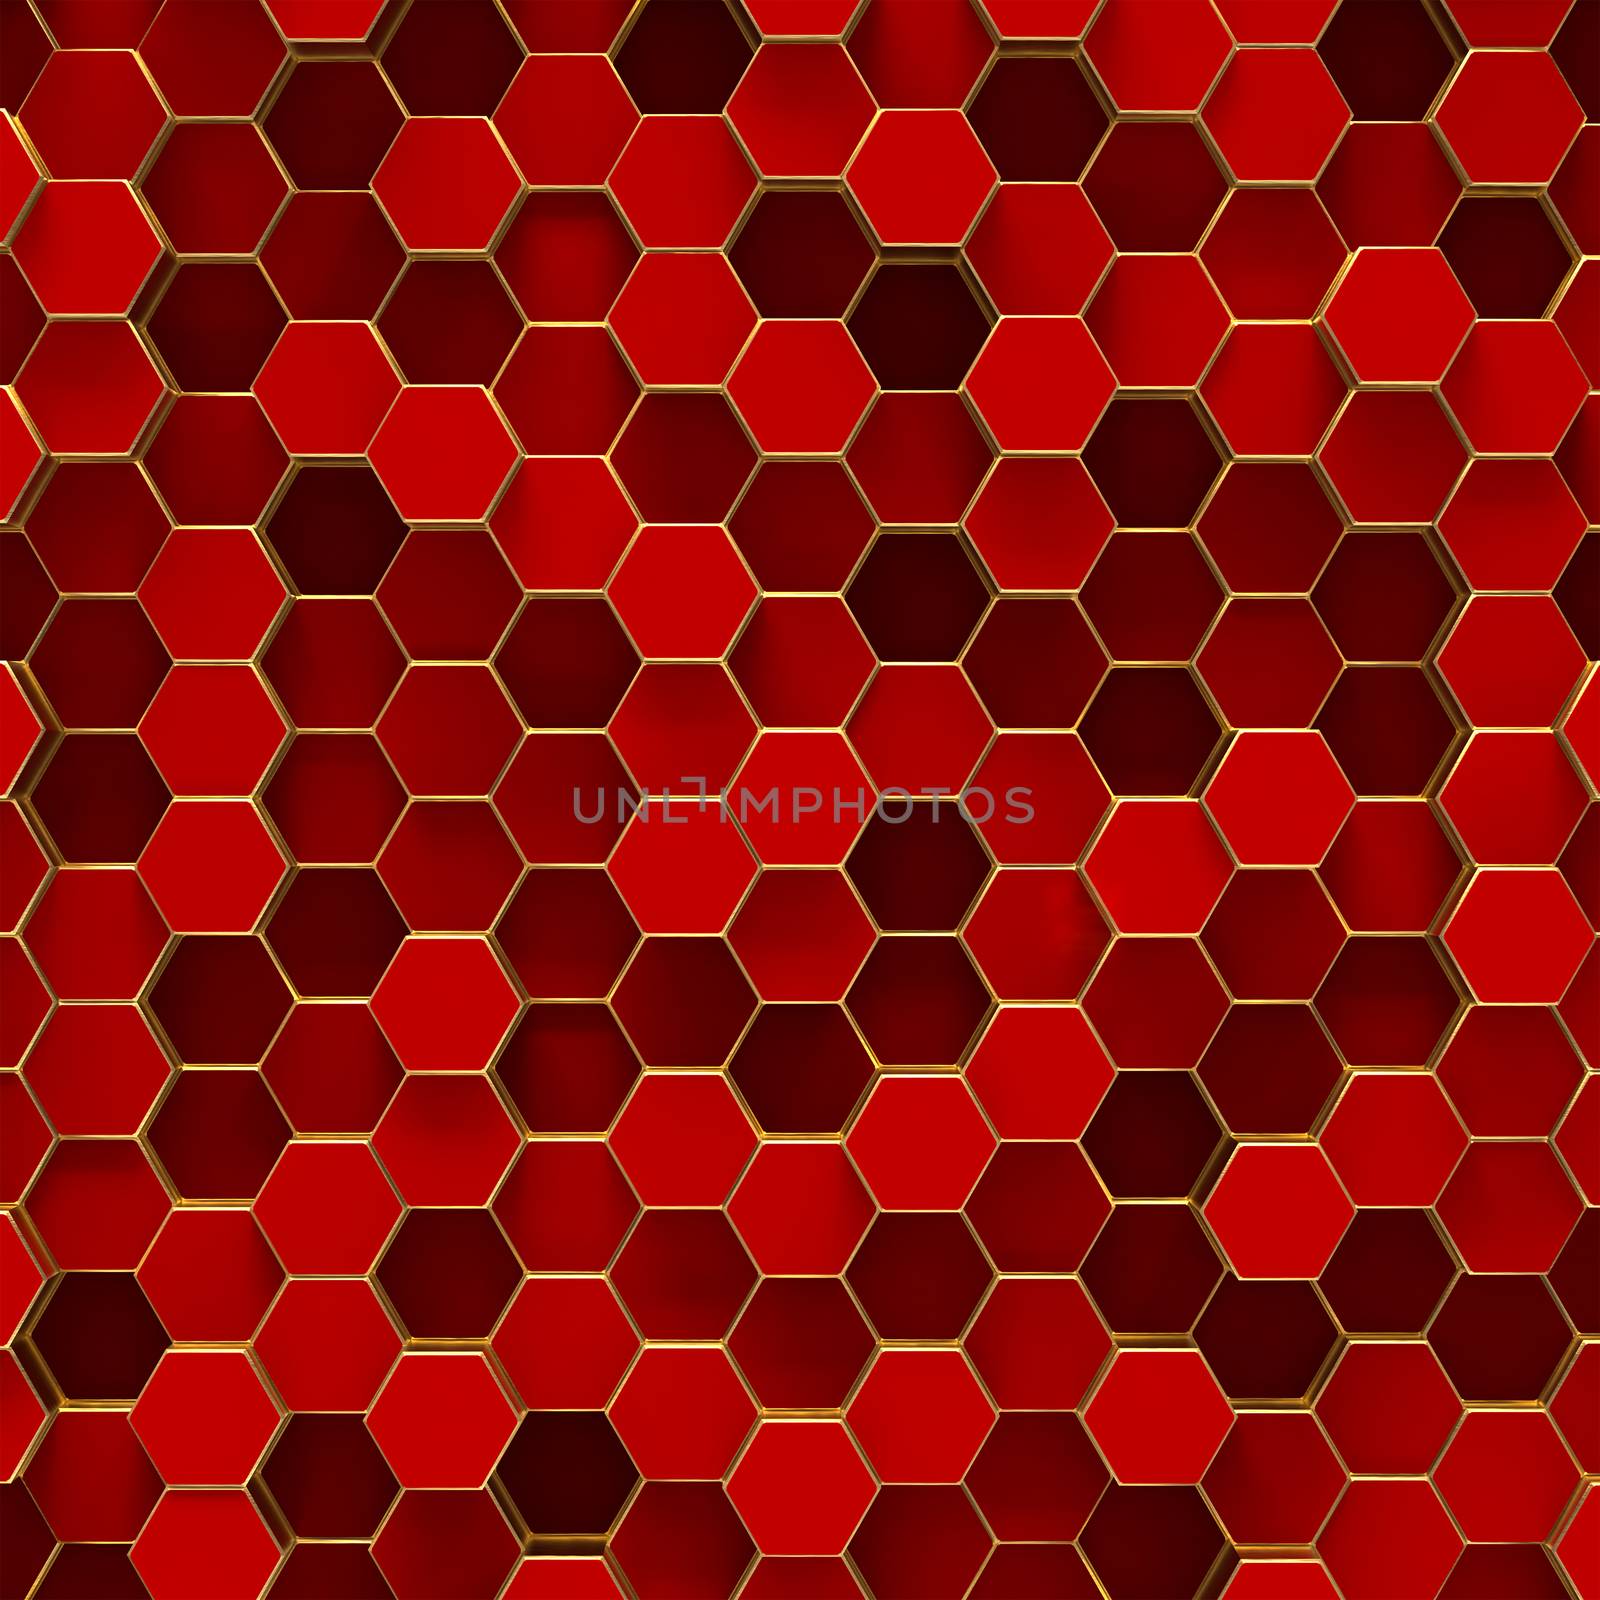 Abstract minimalistic modern technological background with red hexagon cells and gold frames of honeycombs.